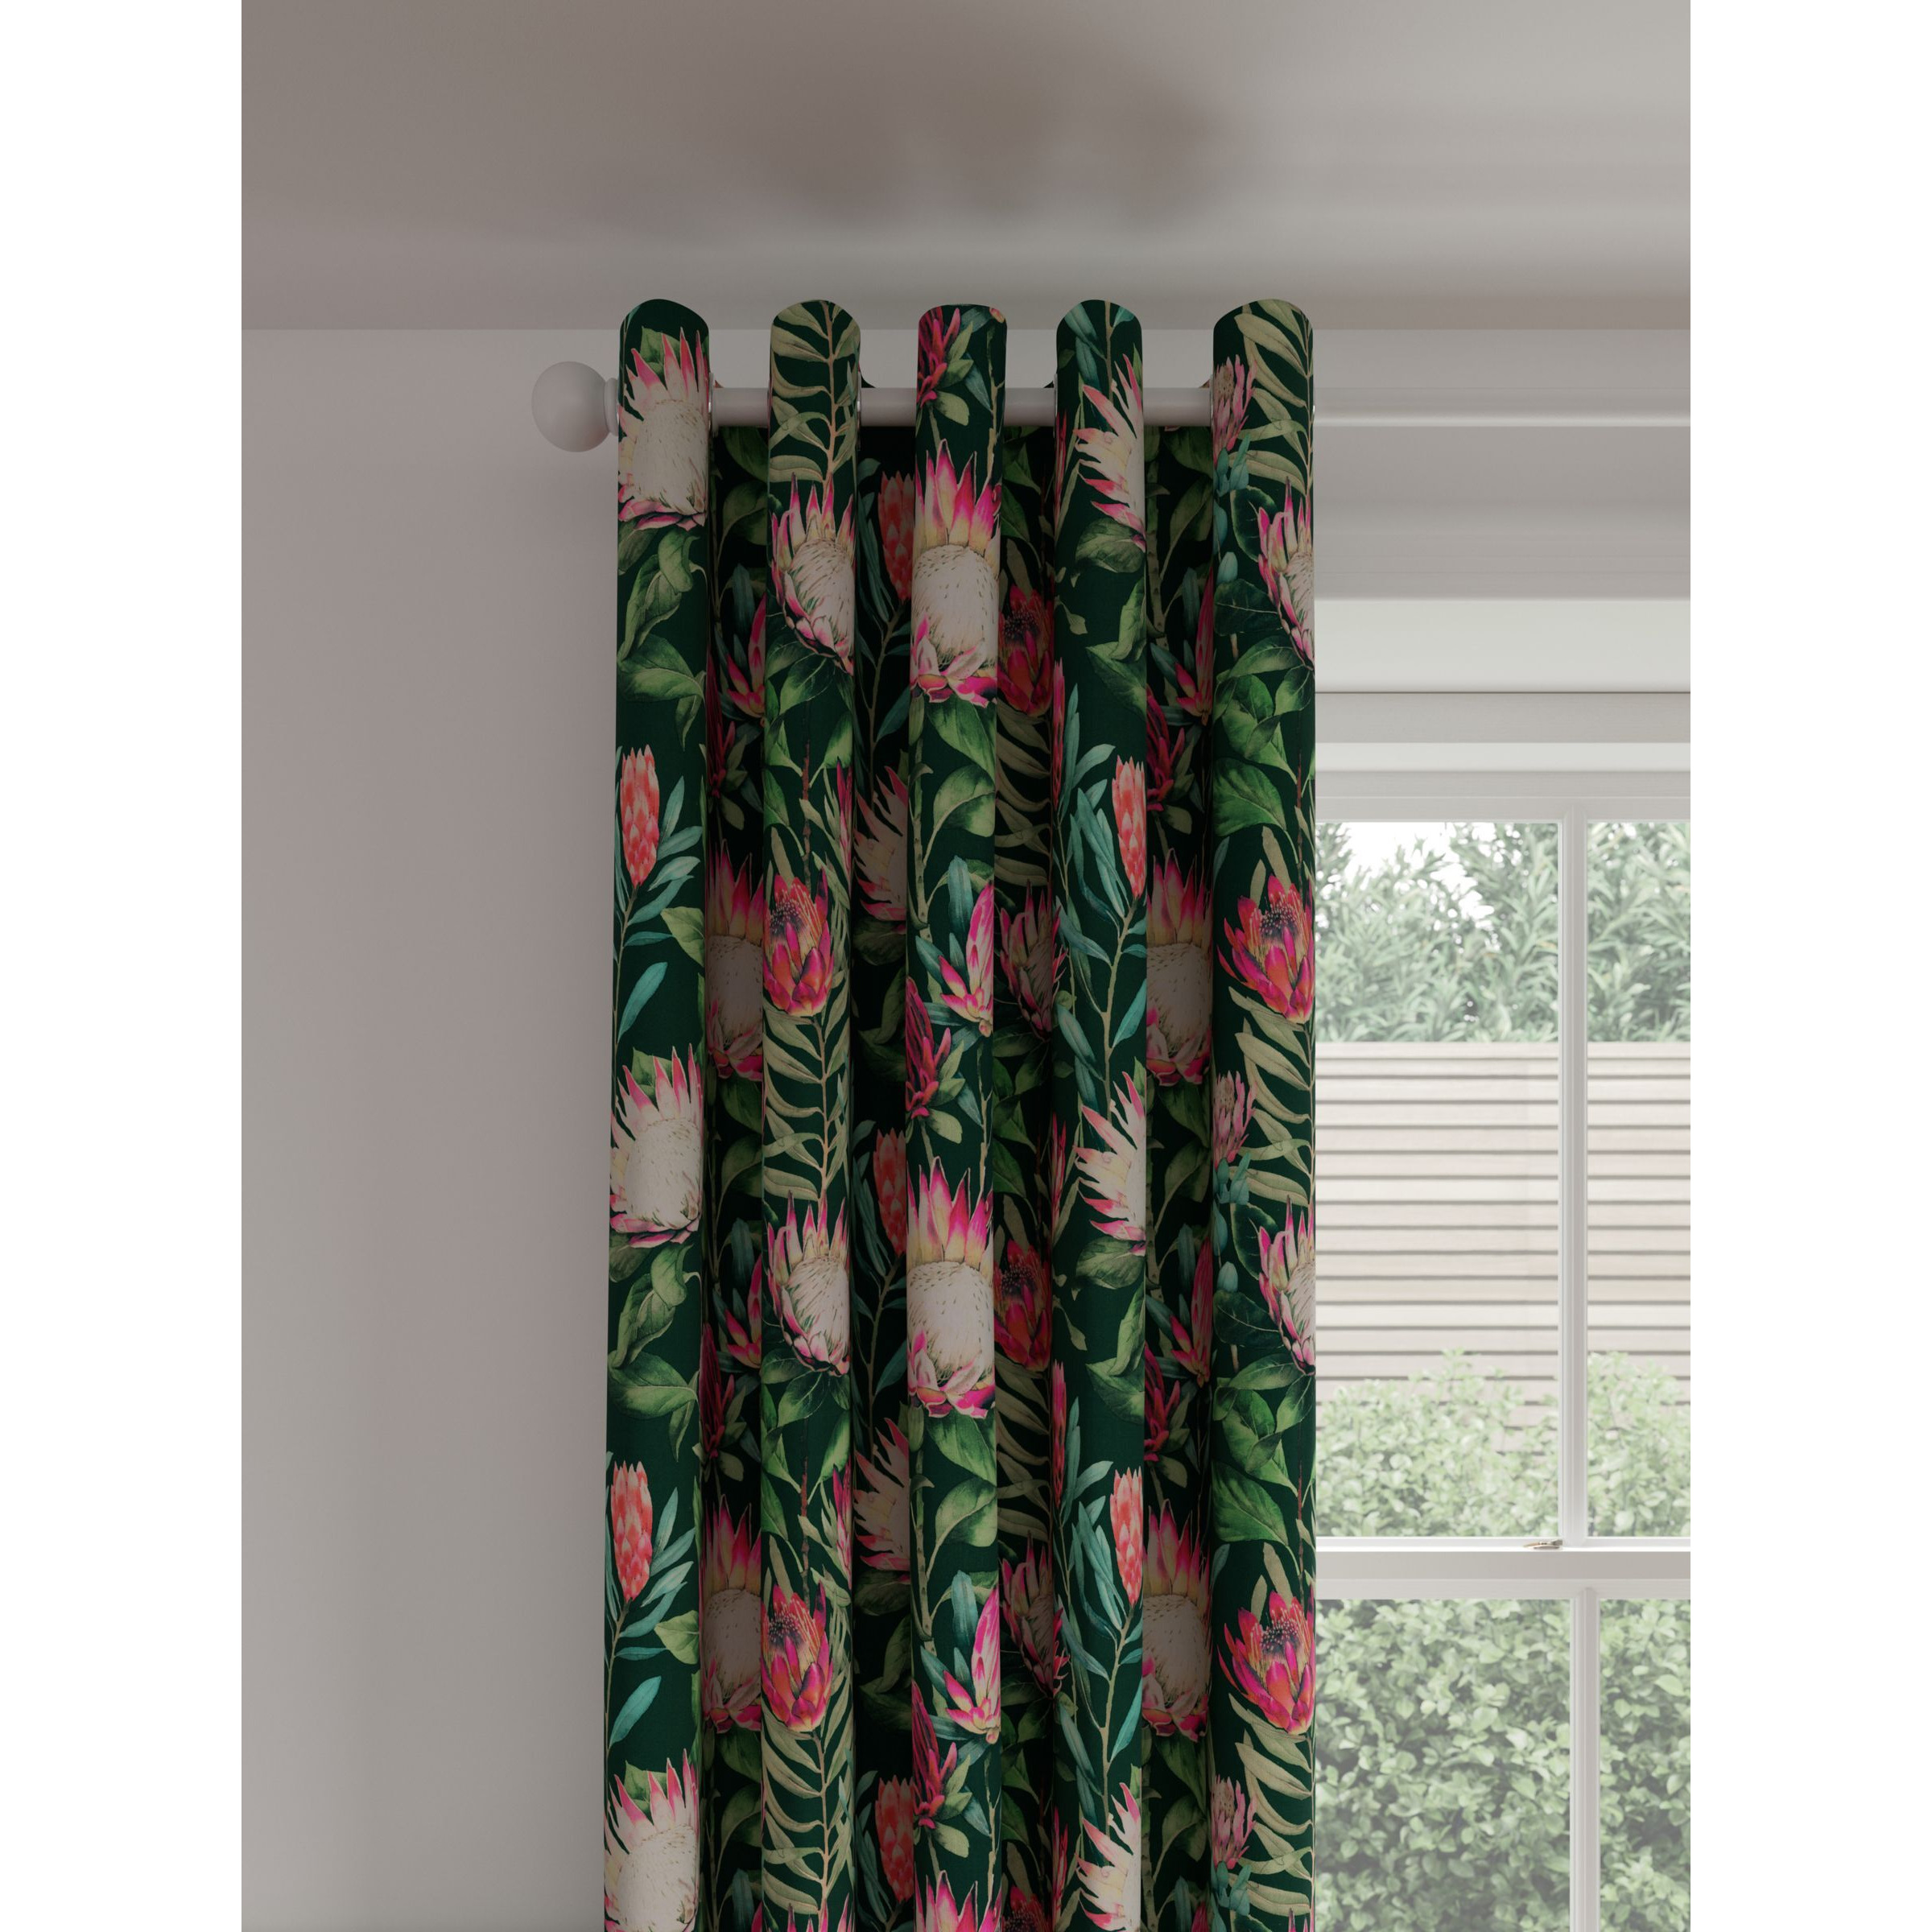 Sanderson King Protea Pair Lined Eyelet Curtains, Teal - image 1